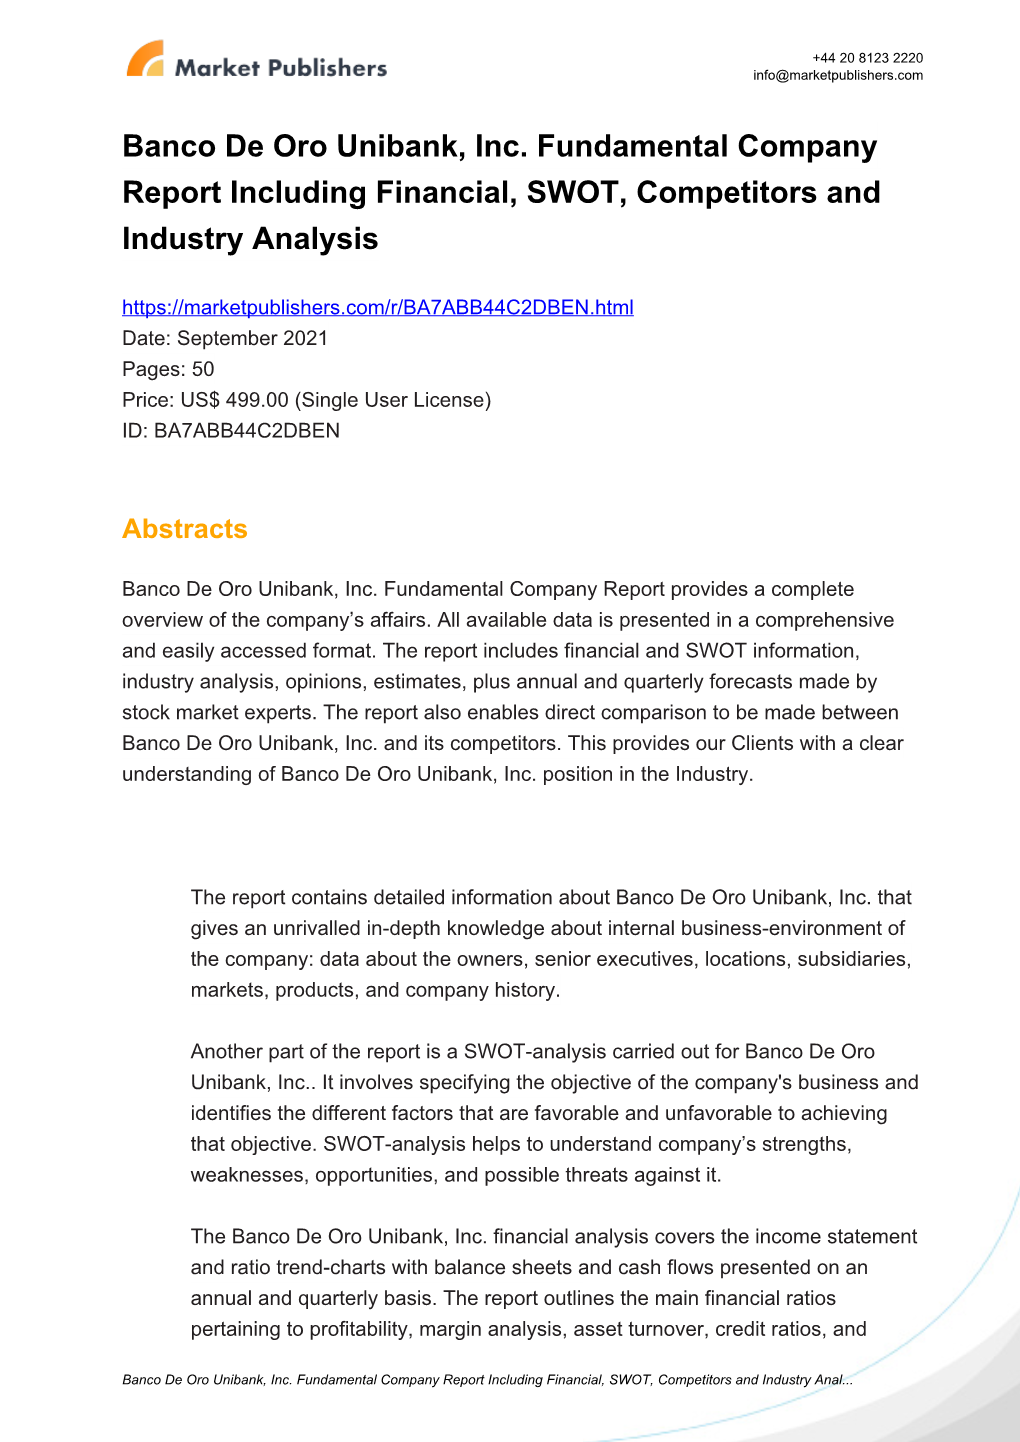 Banco De Oro Unibank, Inc. Fundamental Company Report Including Financial, SWOT, Competitors and Industry Analysis